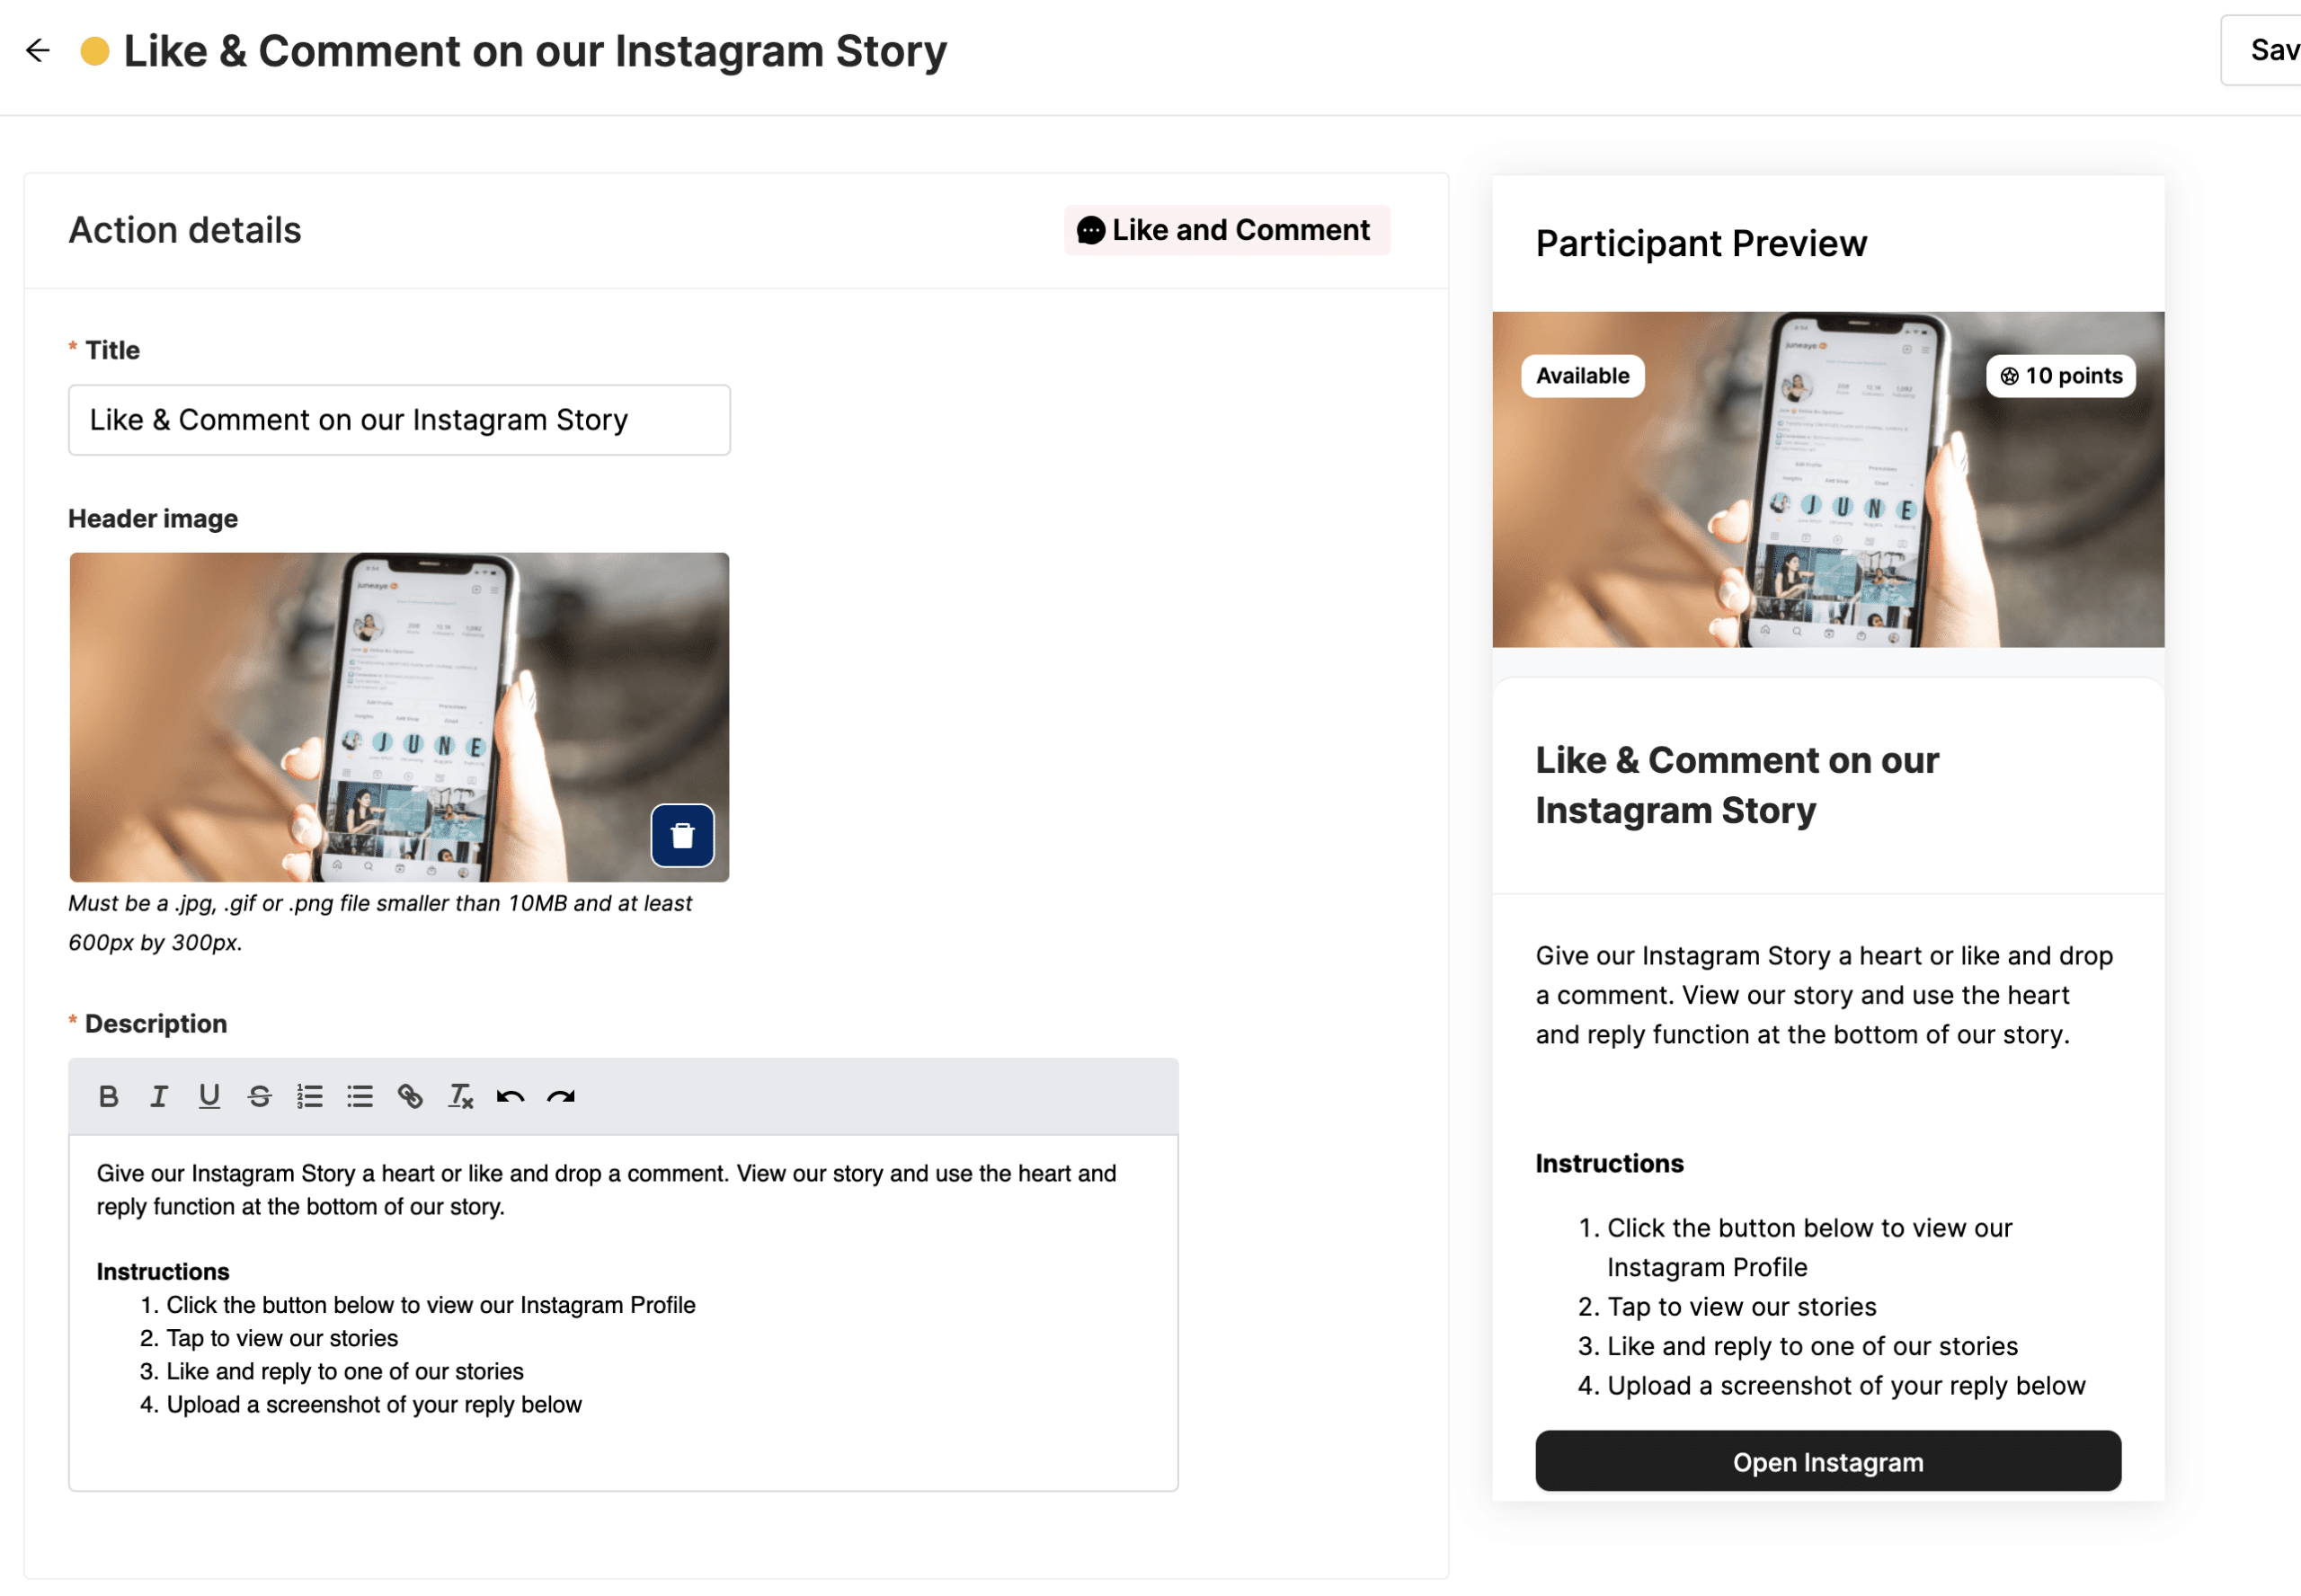 launch actions to get existing brand ambassadors to share your Instagram Story for finding new ambassadors